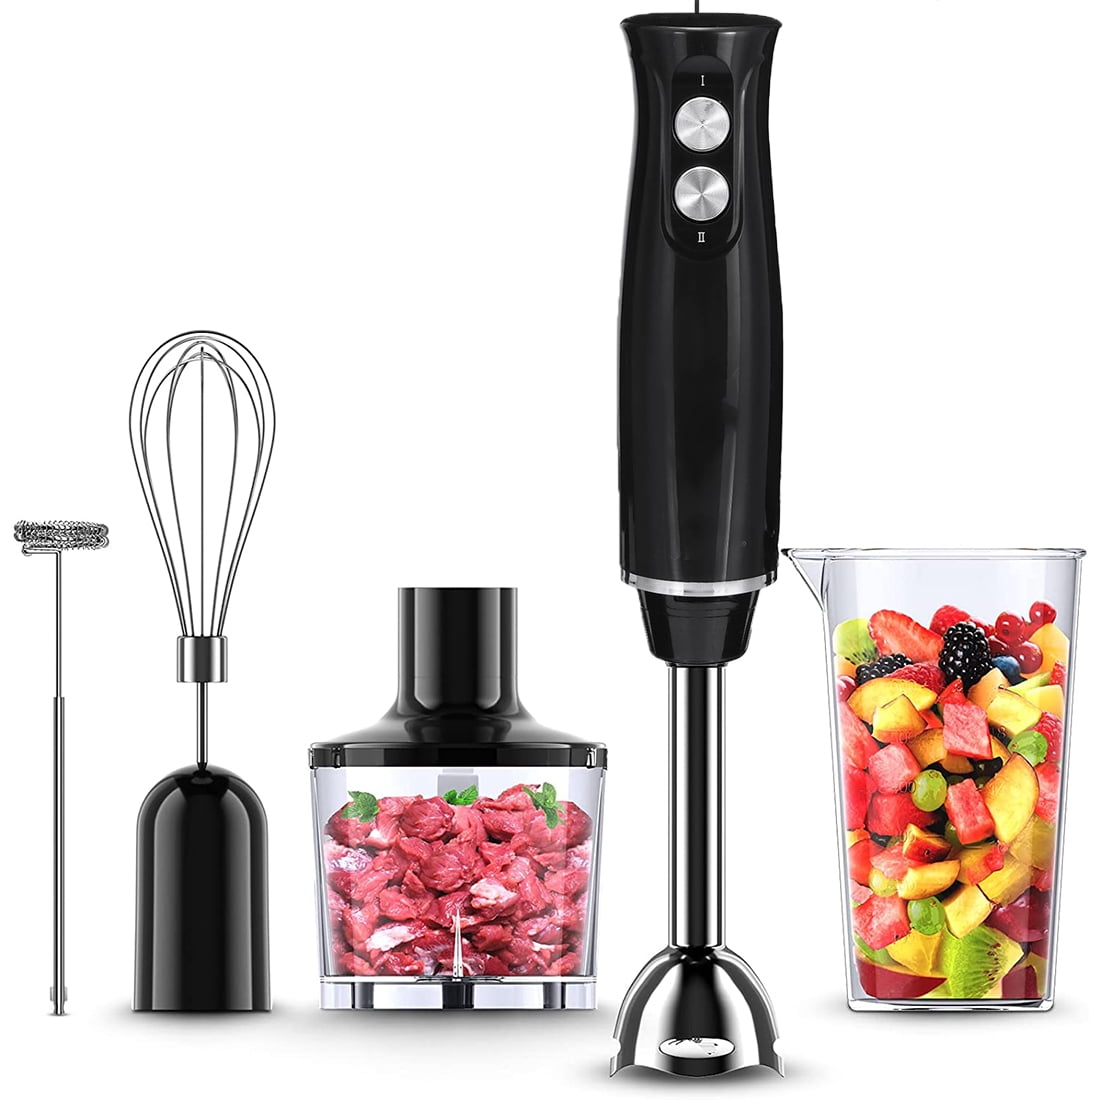 Curtis Stone Single Drink Mixer Small Black Electric kitchen